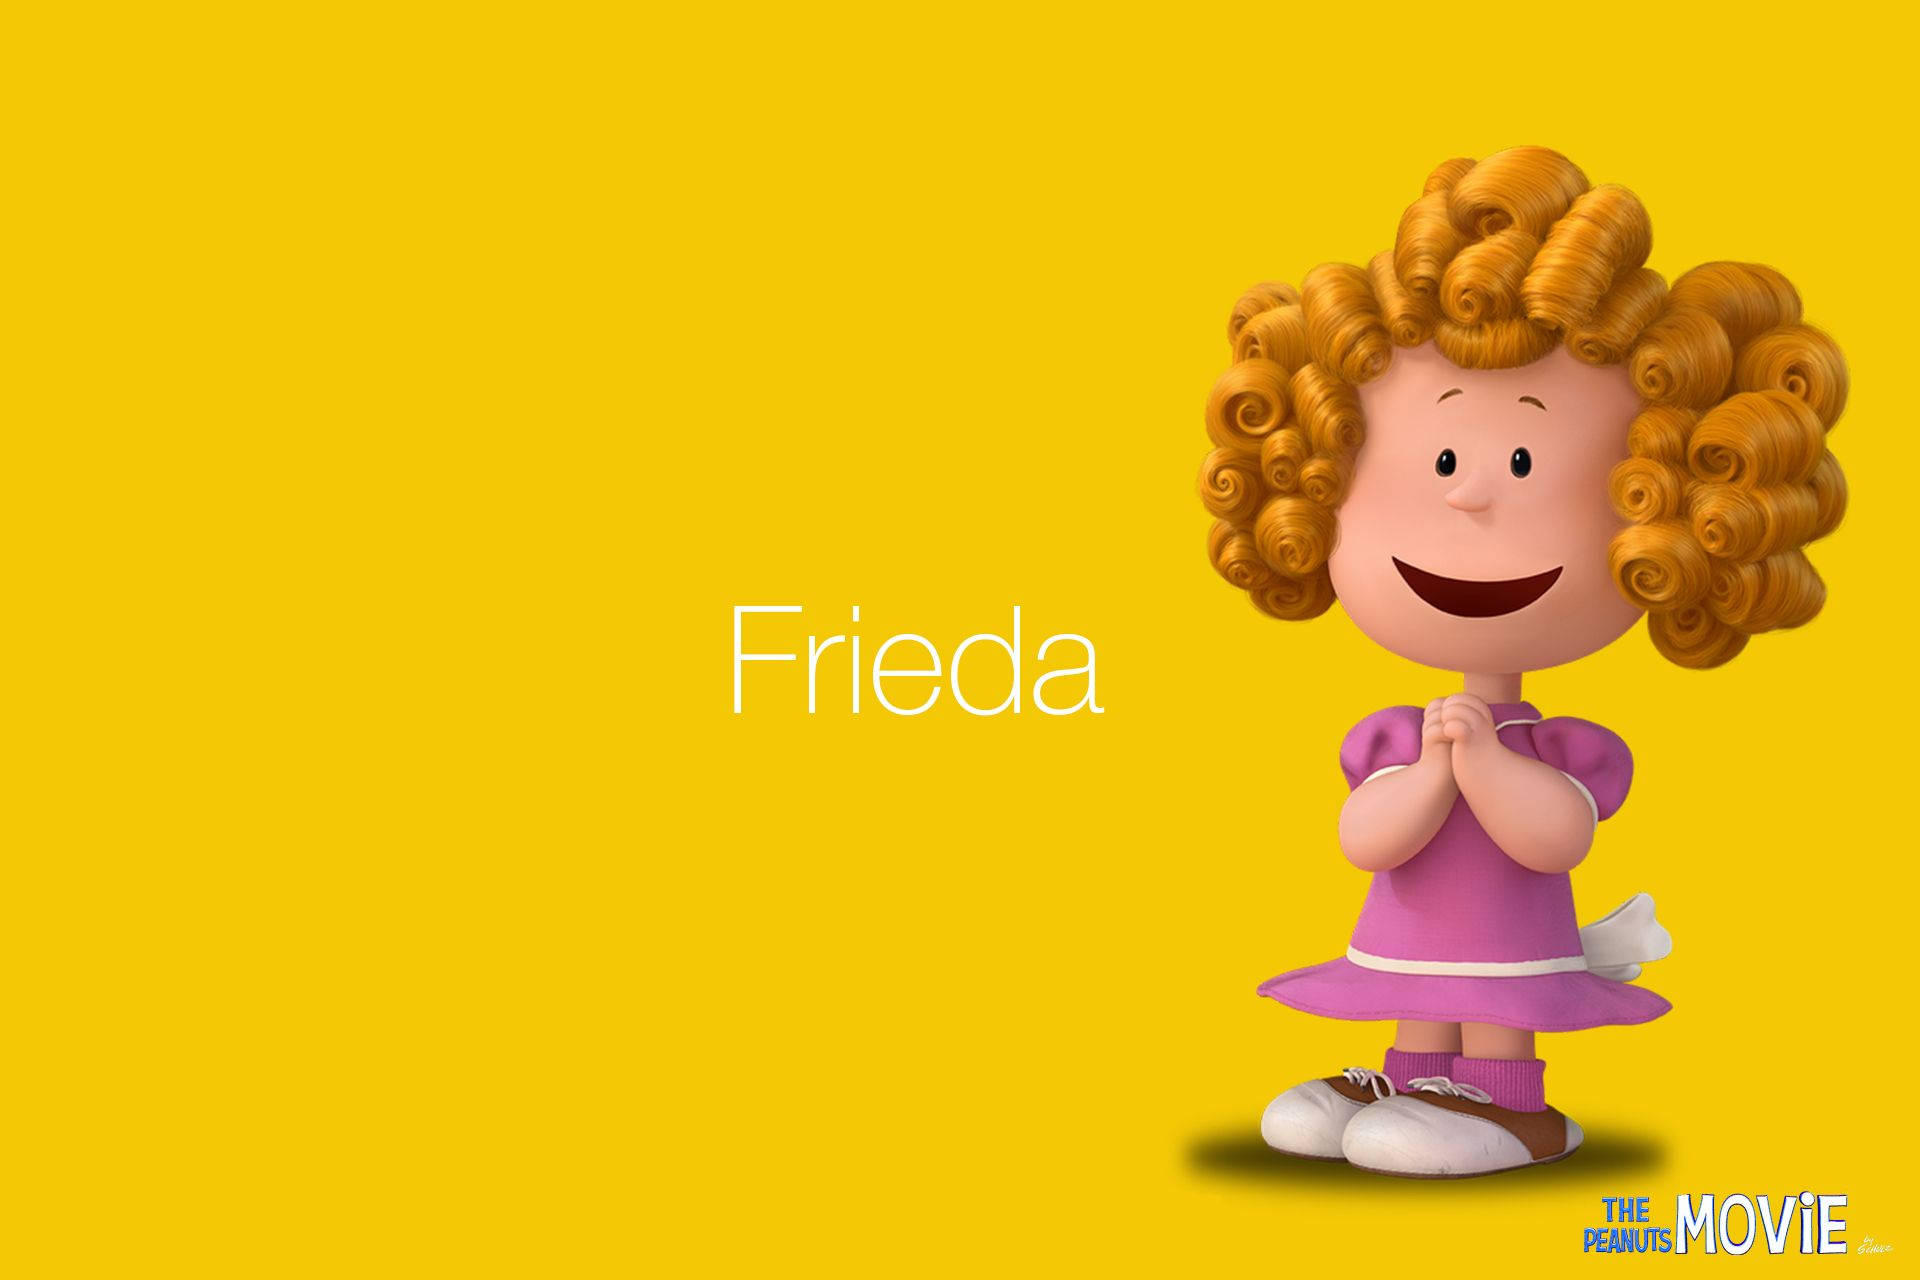 Frieda from the Peanuts Movie Smiling Energetically Wallpaper